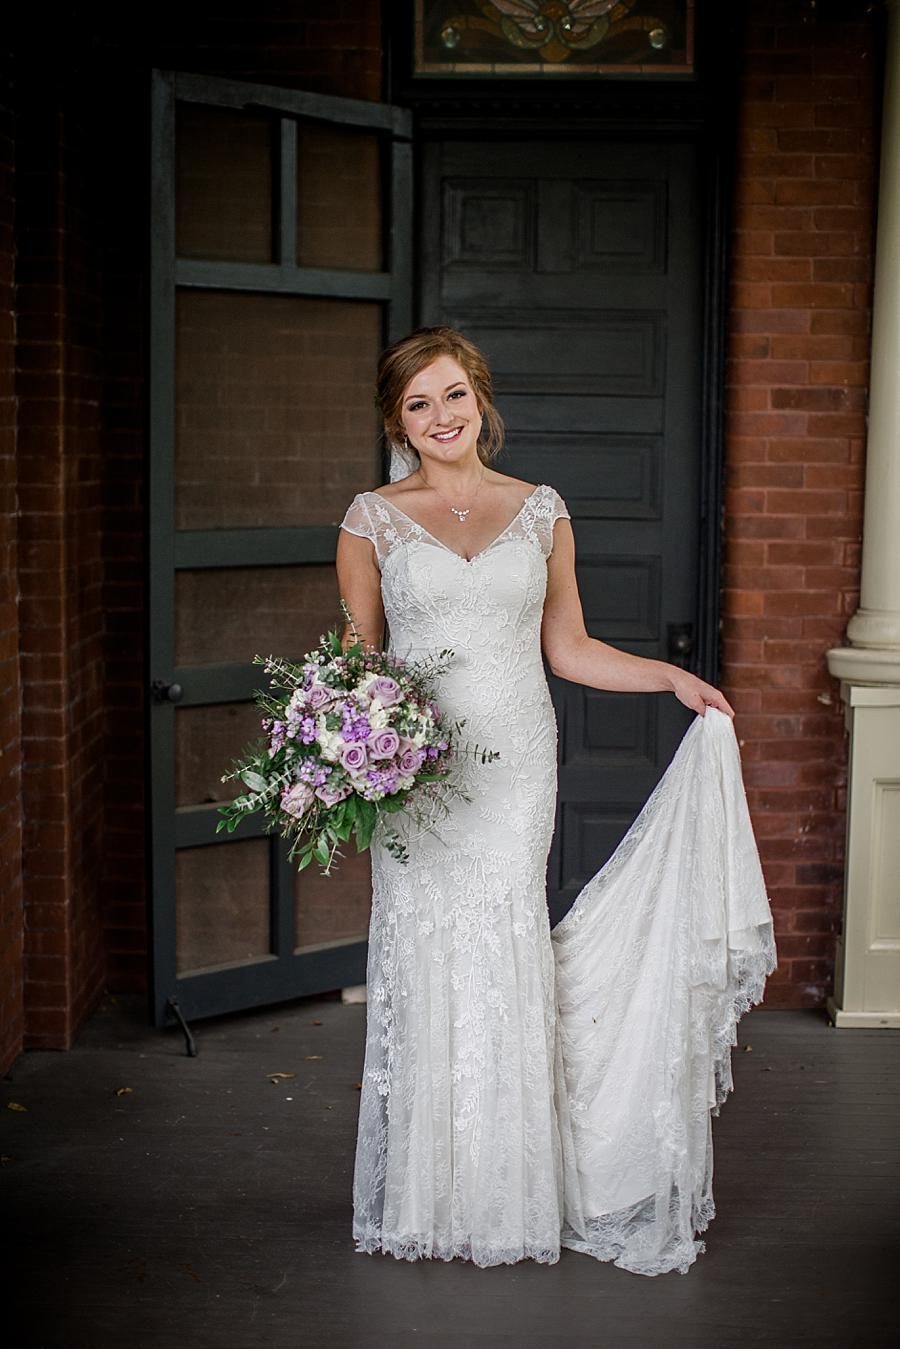 Bride holding dress at this Historic Westwood Bridal session by Knoxville Wedding Photographer, Amanda May Photos.